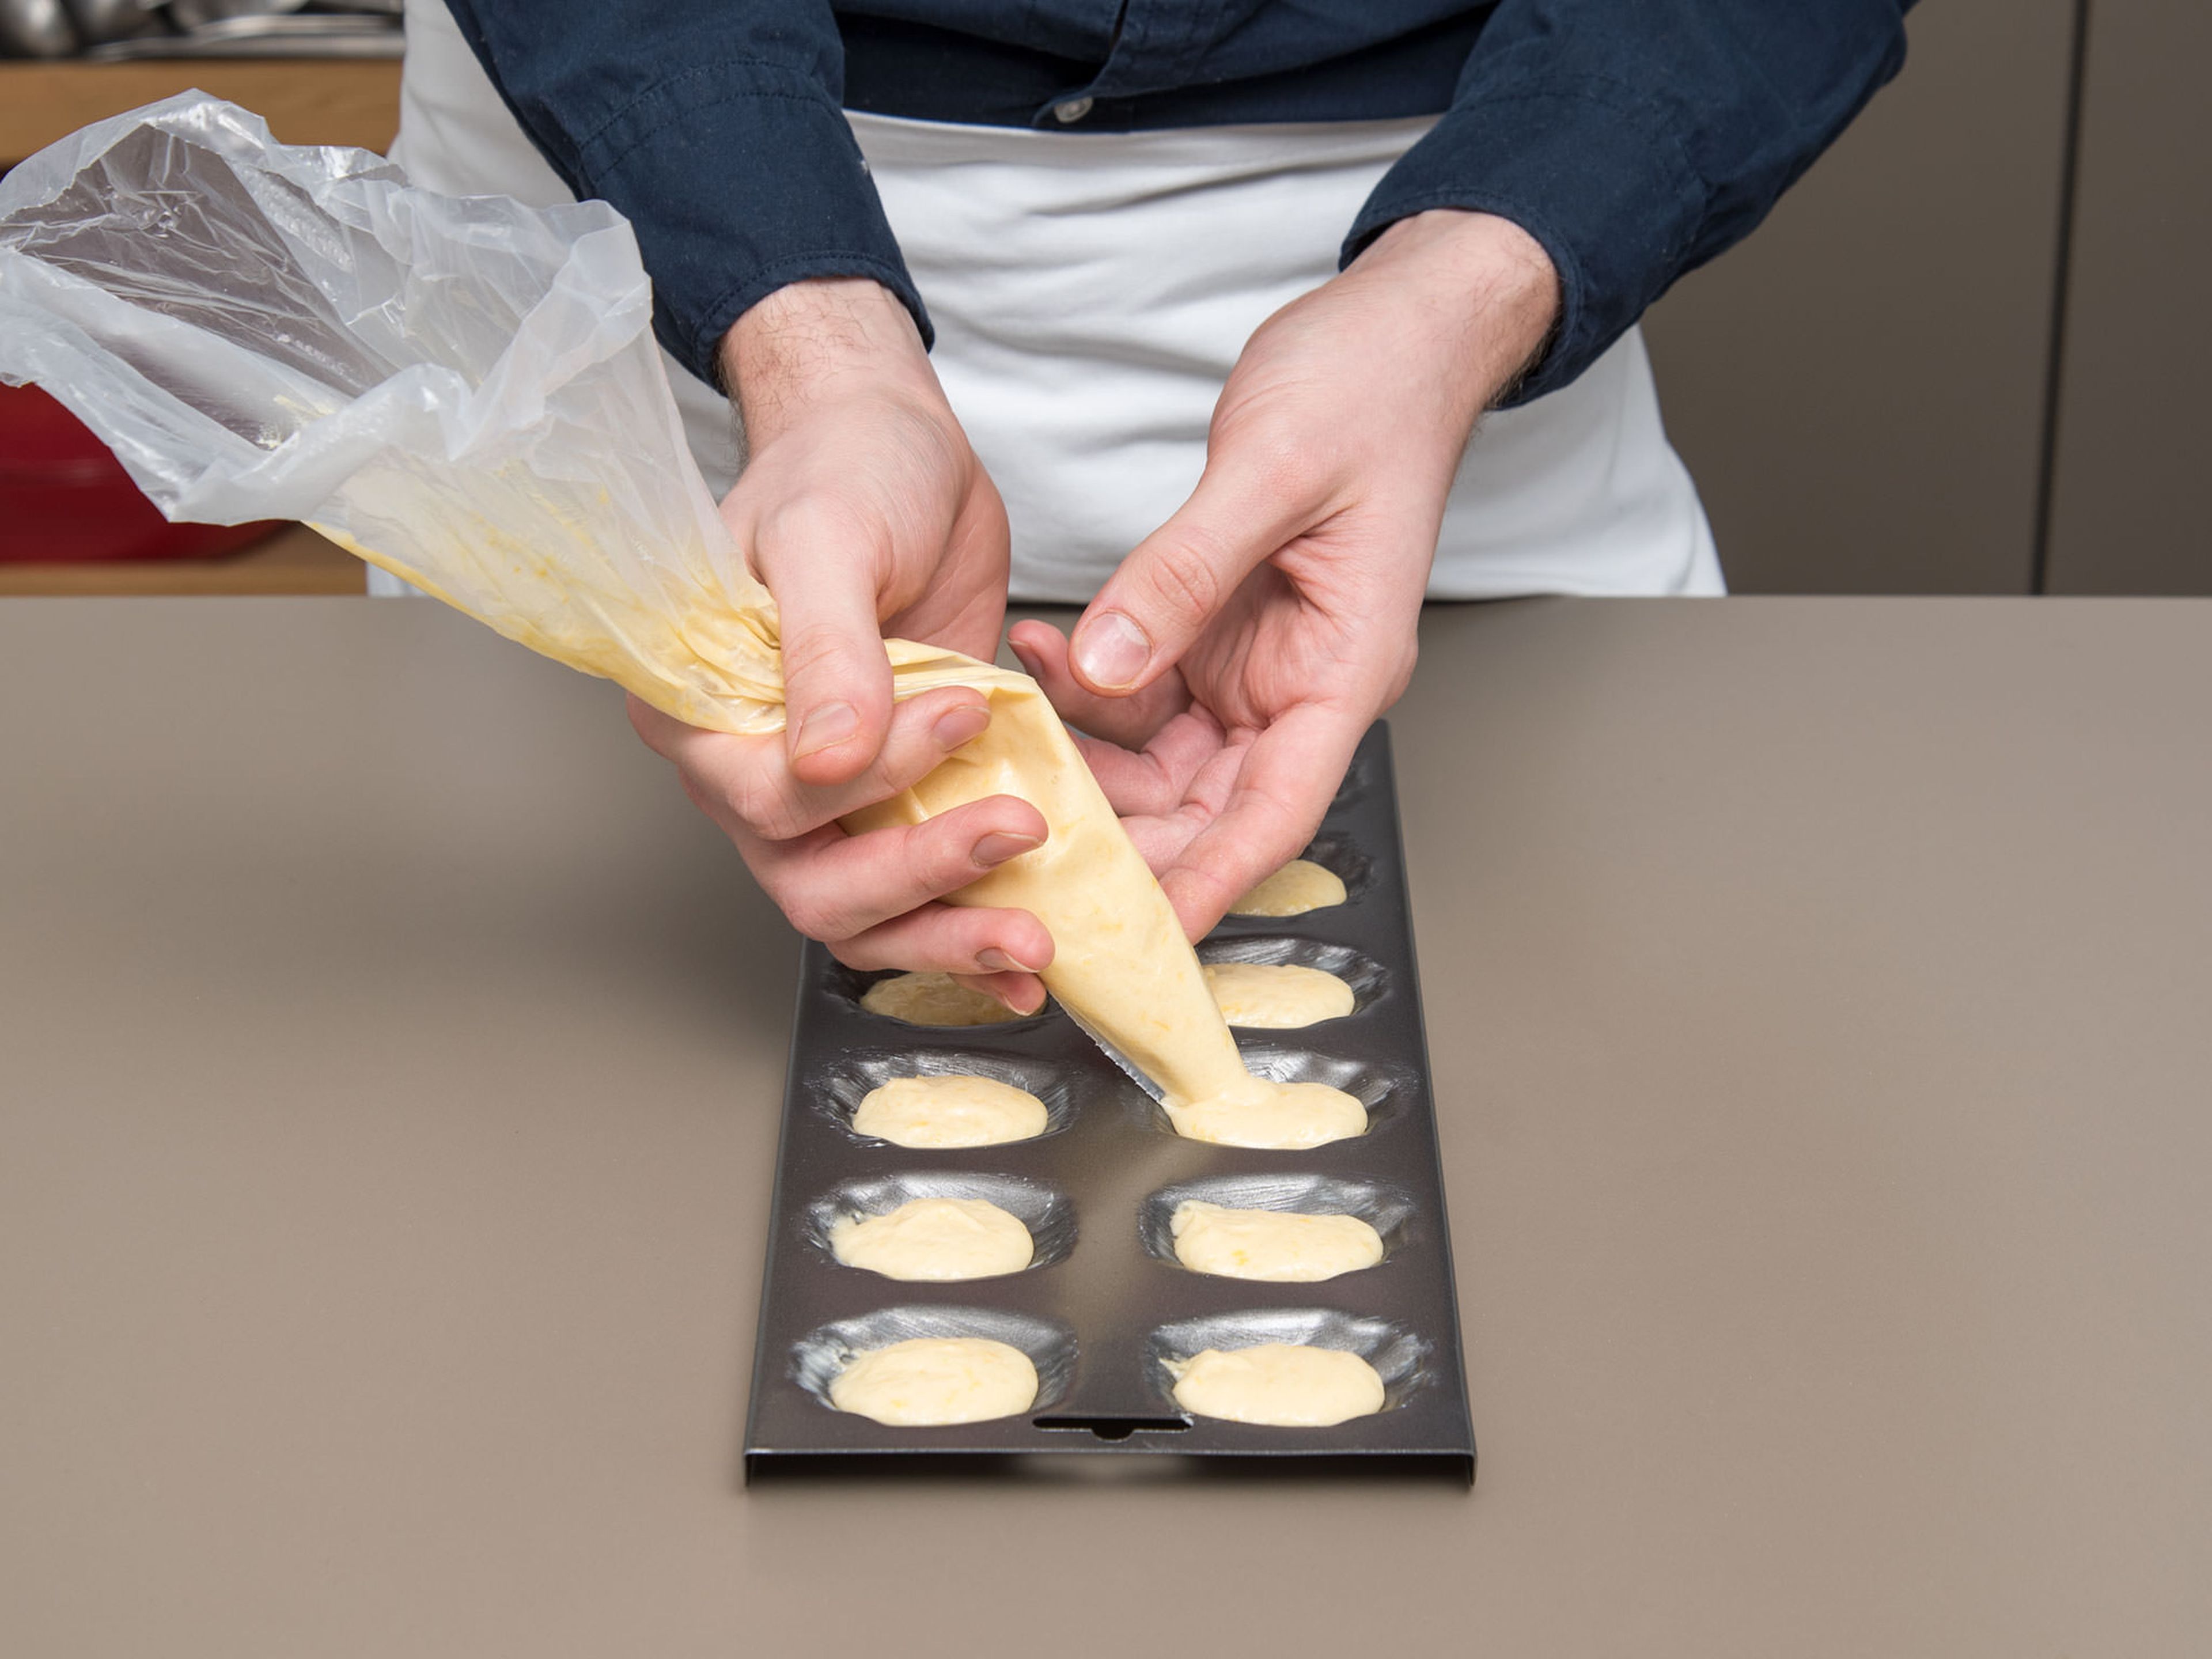 Pre-heat oven to 210°C/410°F. Grease baking pan with butter. Remove batter from the fridge and transfer into a piping bag. Cut off the tip and pipe batter into baking pan up to three quarters, so the madeleines have enough space to rise.